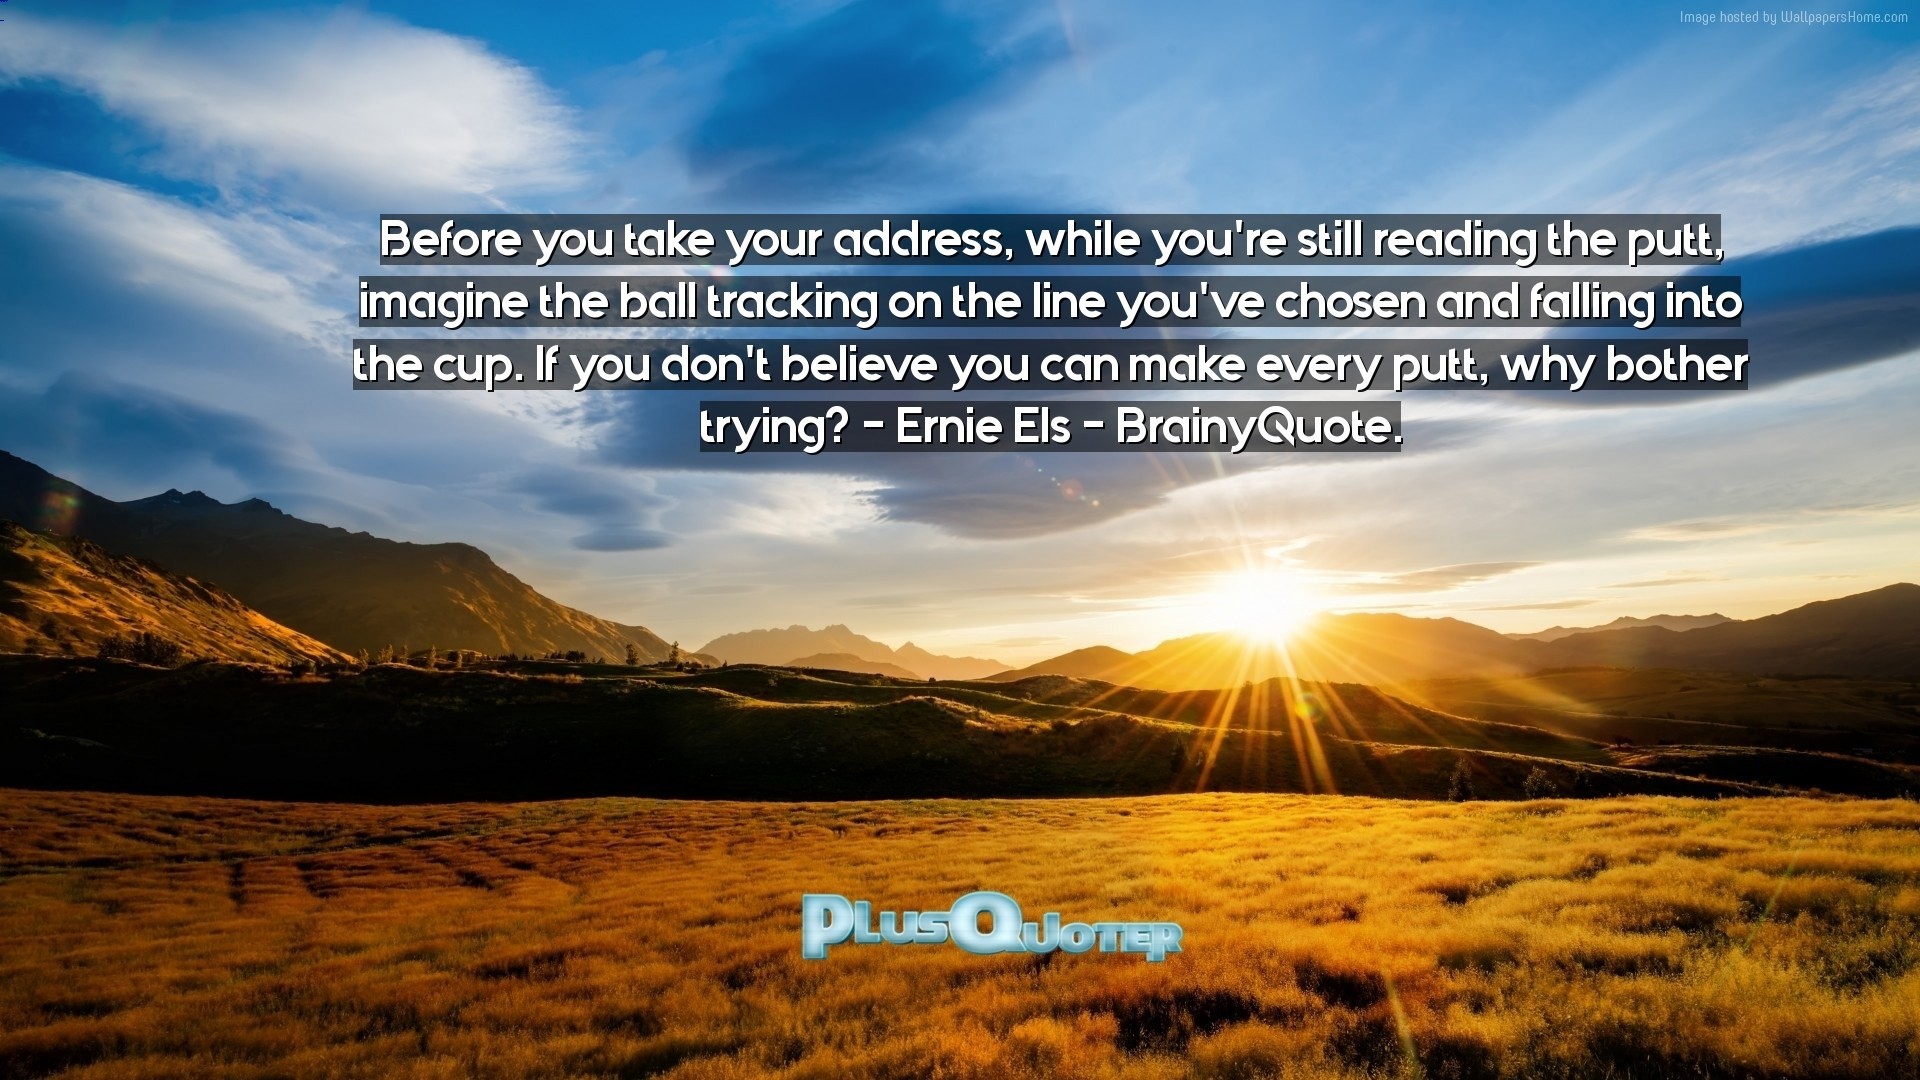 1920x1080 Download Wallpaper with inspirational Quotes- "Before you take your  address, while you